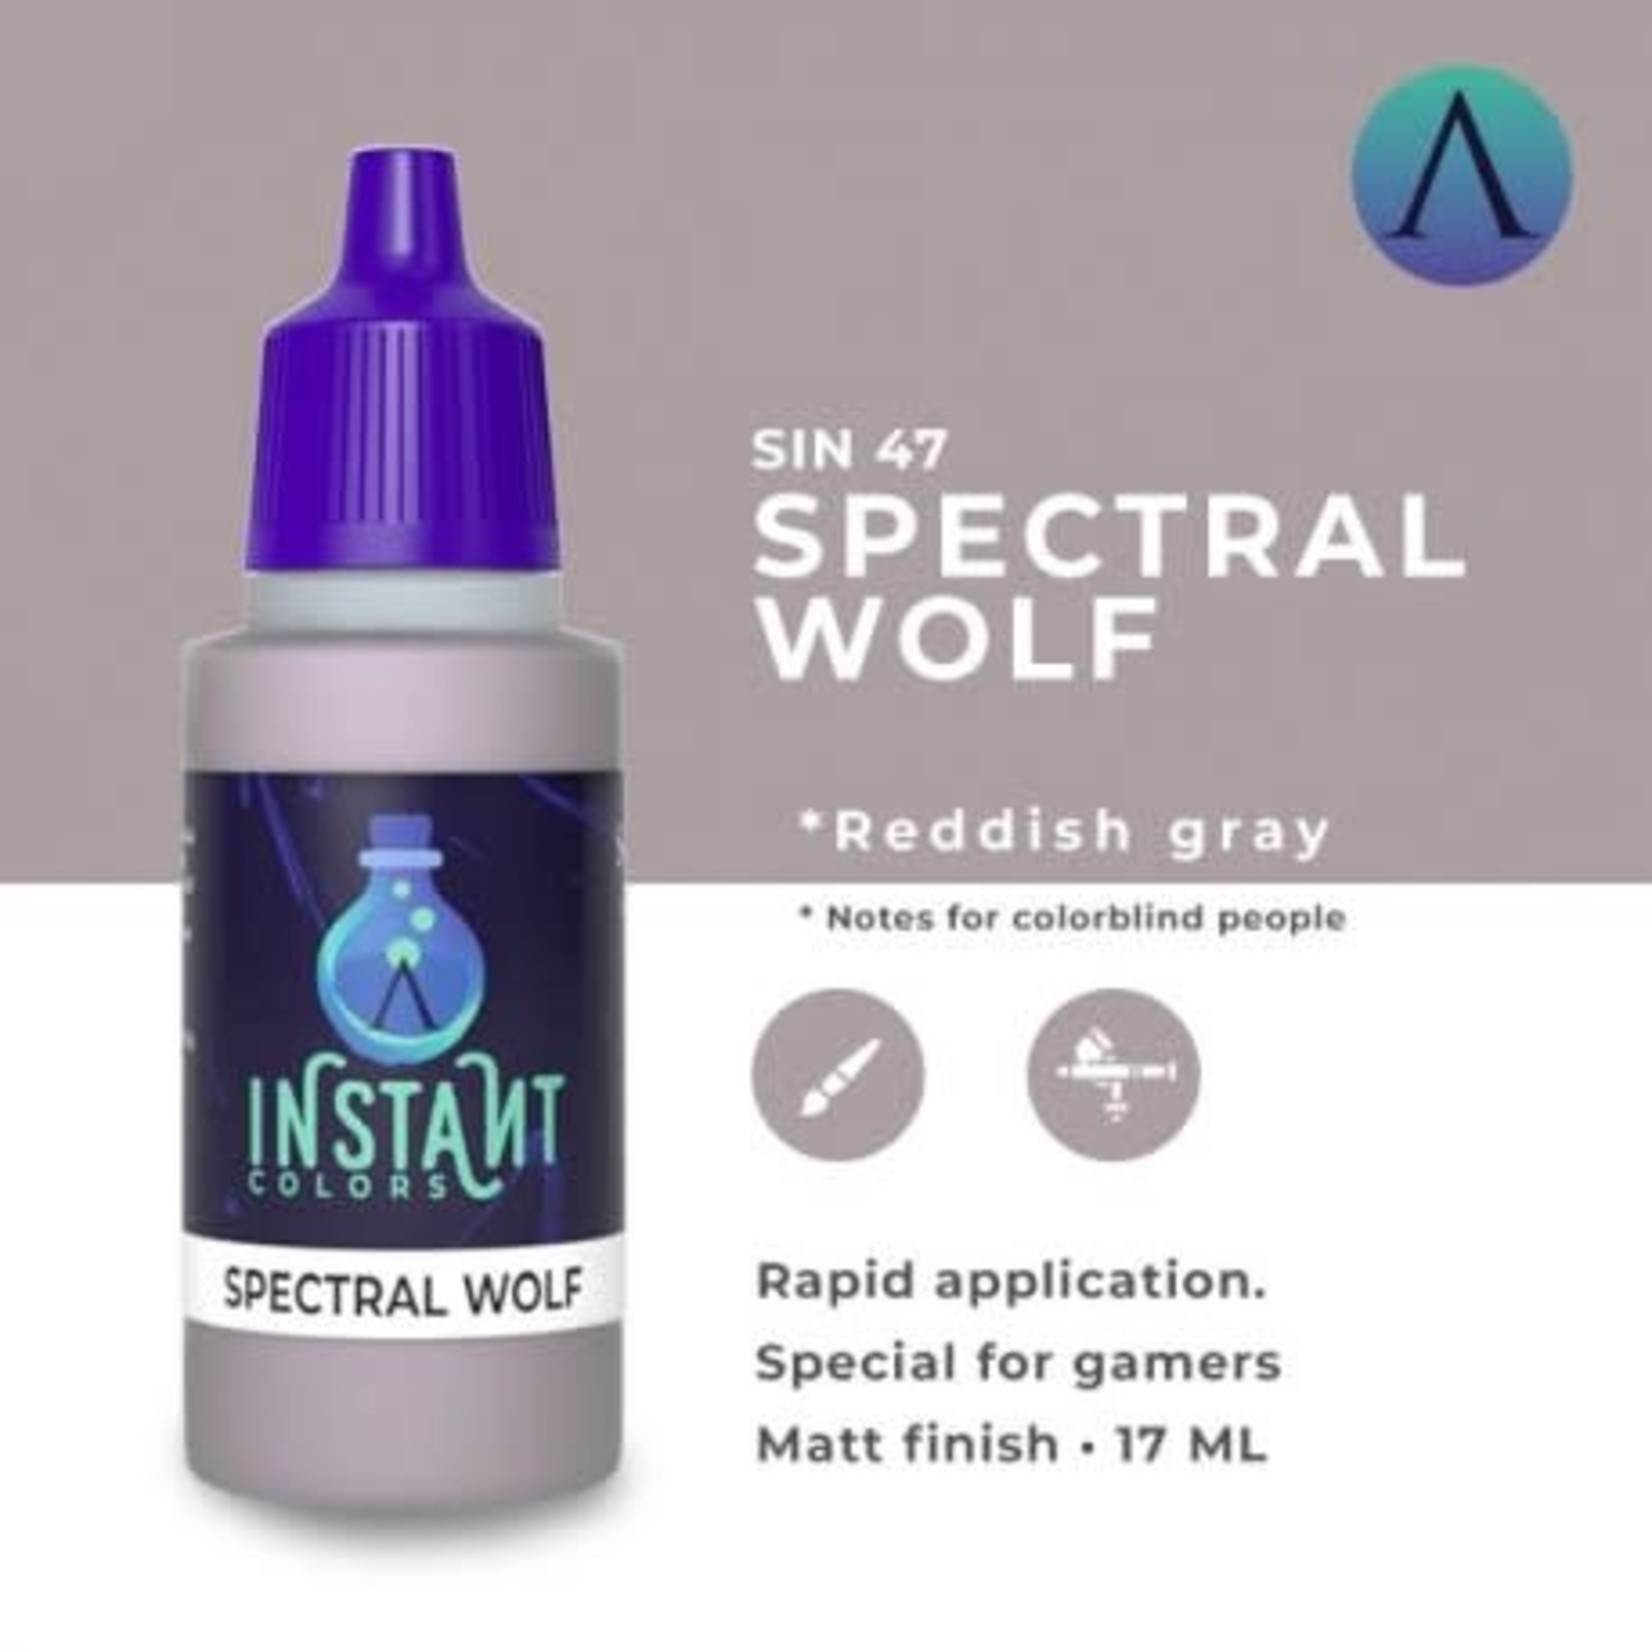 Scale 75 Instant Colors SIN47 Spectral Wolf 17ml